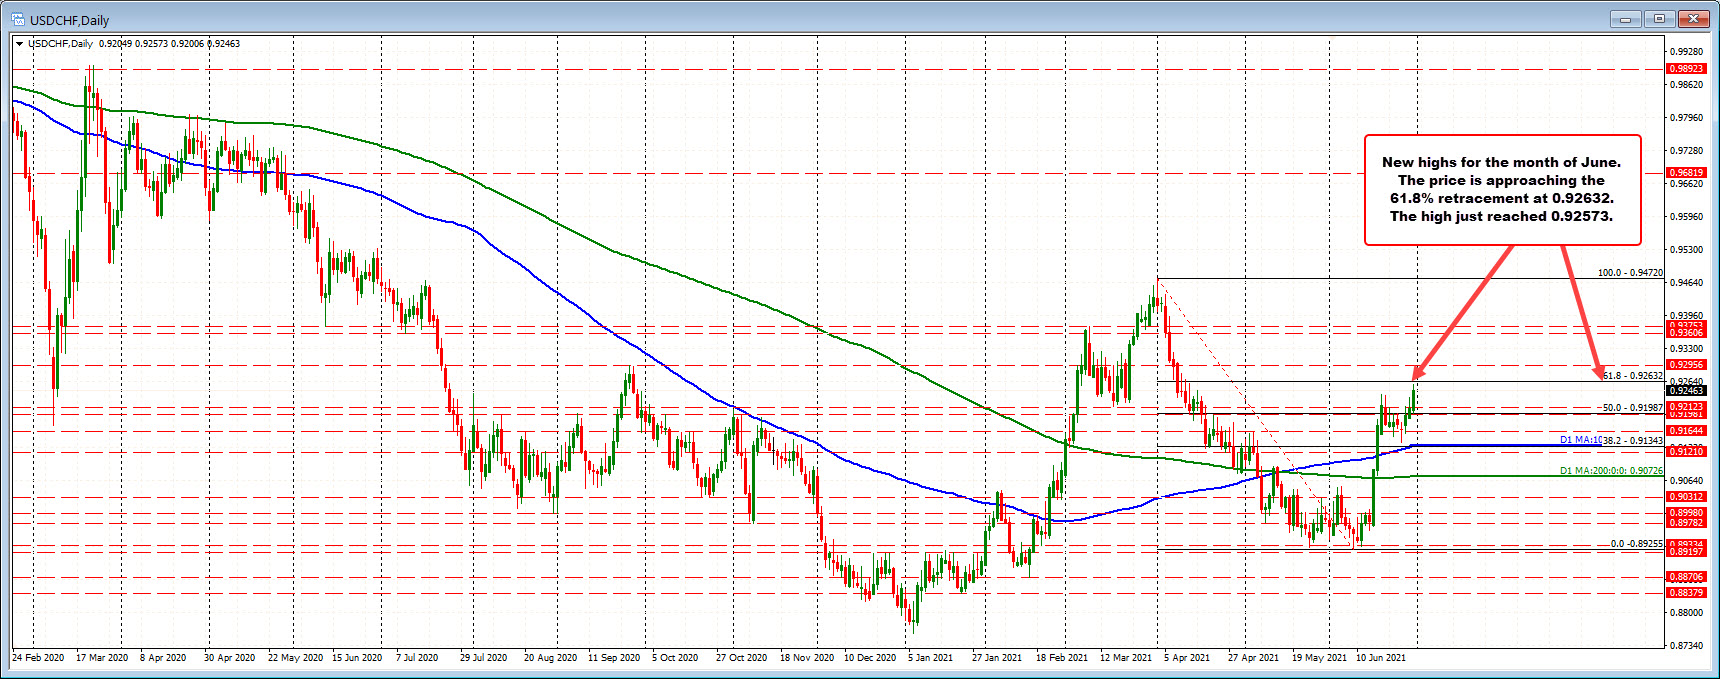 USDCHF on the daily chart is approaching the 61.8% retracement